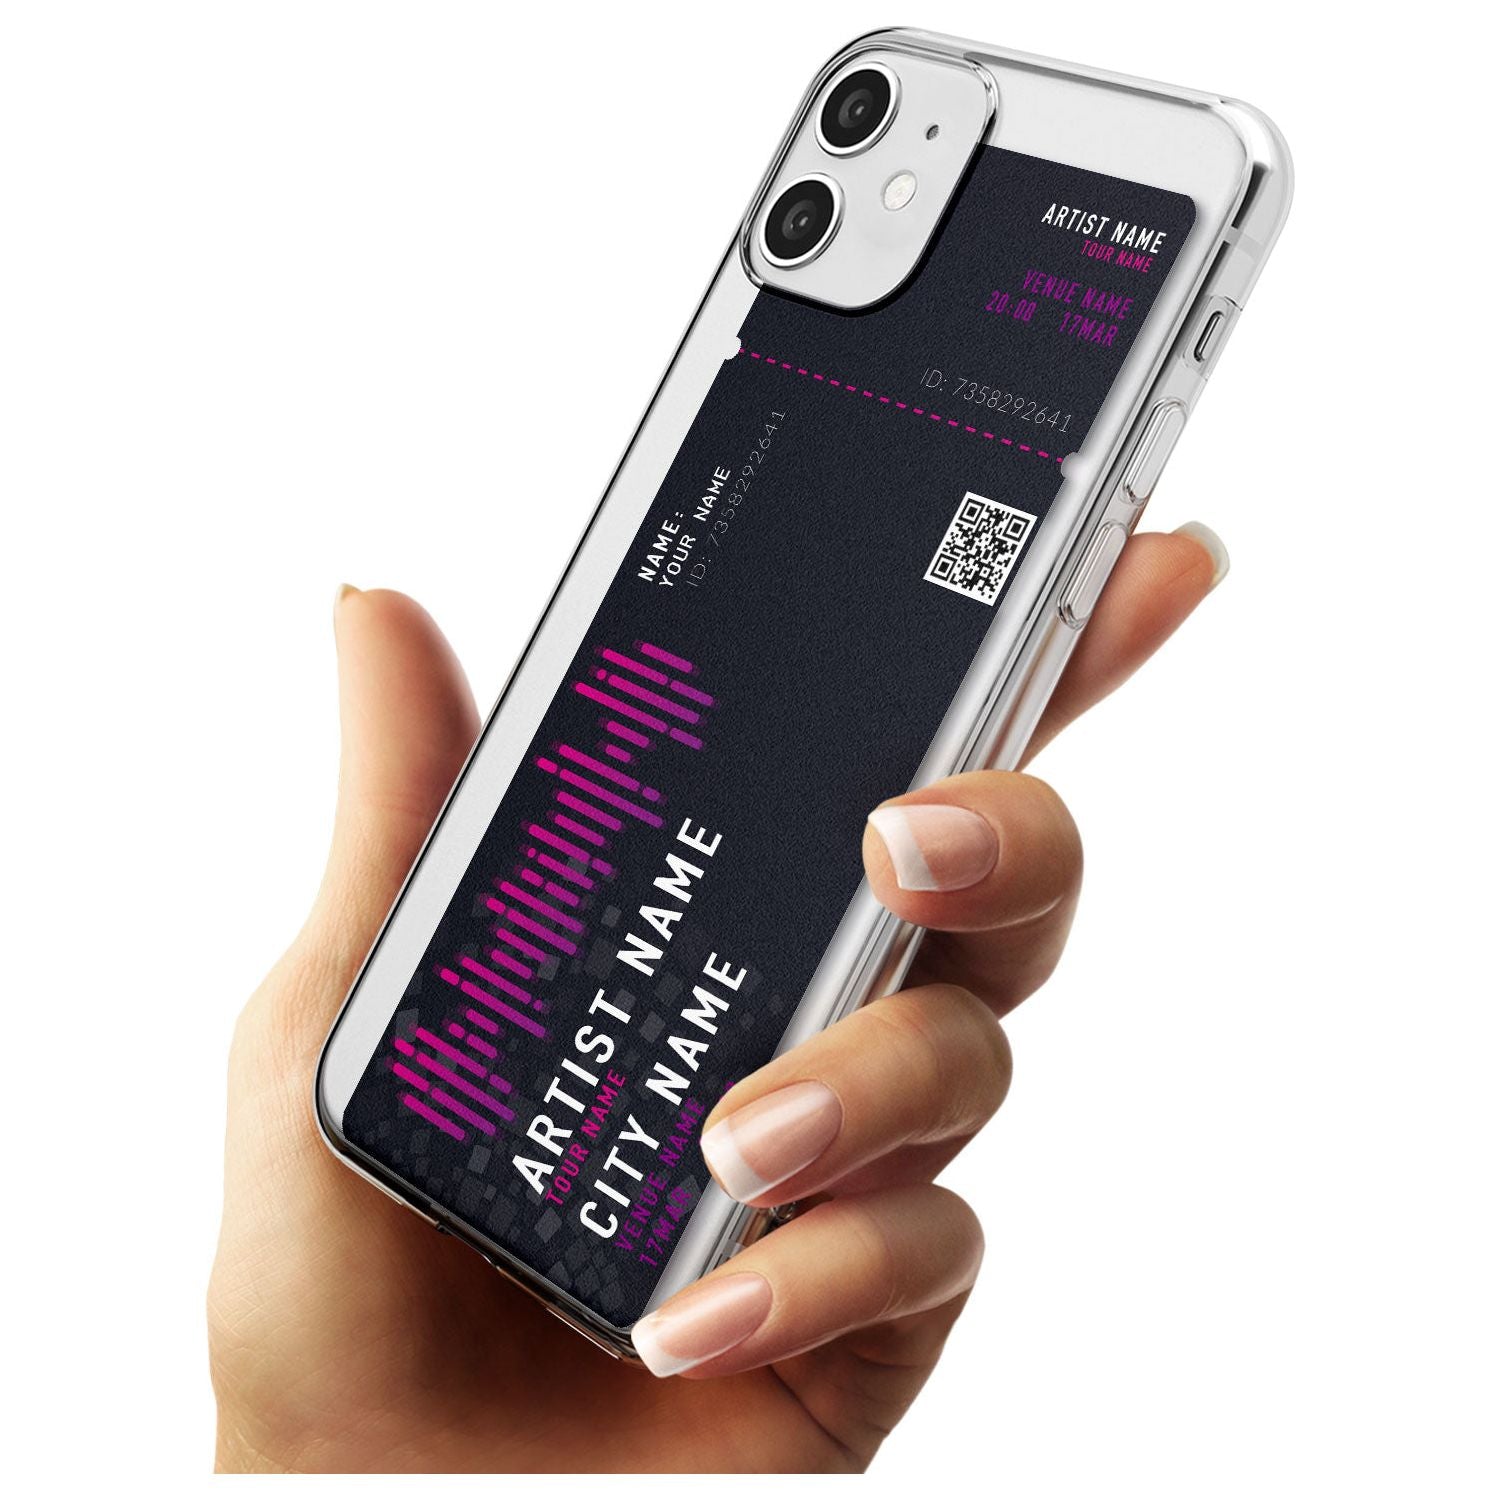 Personalised Concert Ticket Slim TPU Phone Case for iPhone 11